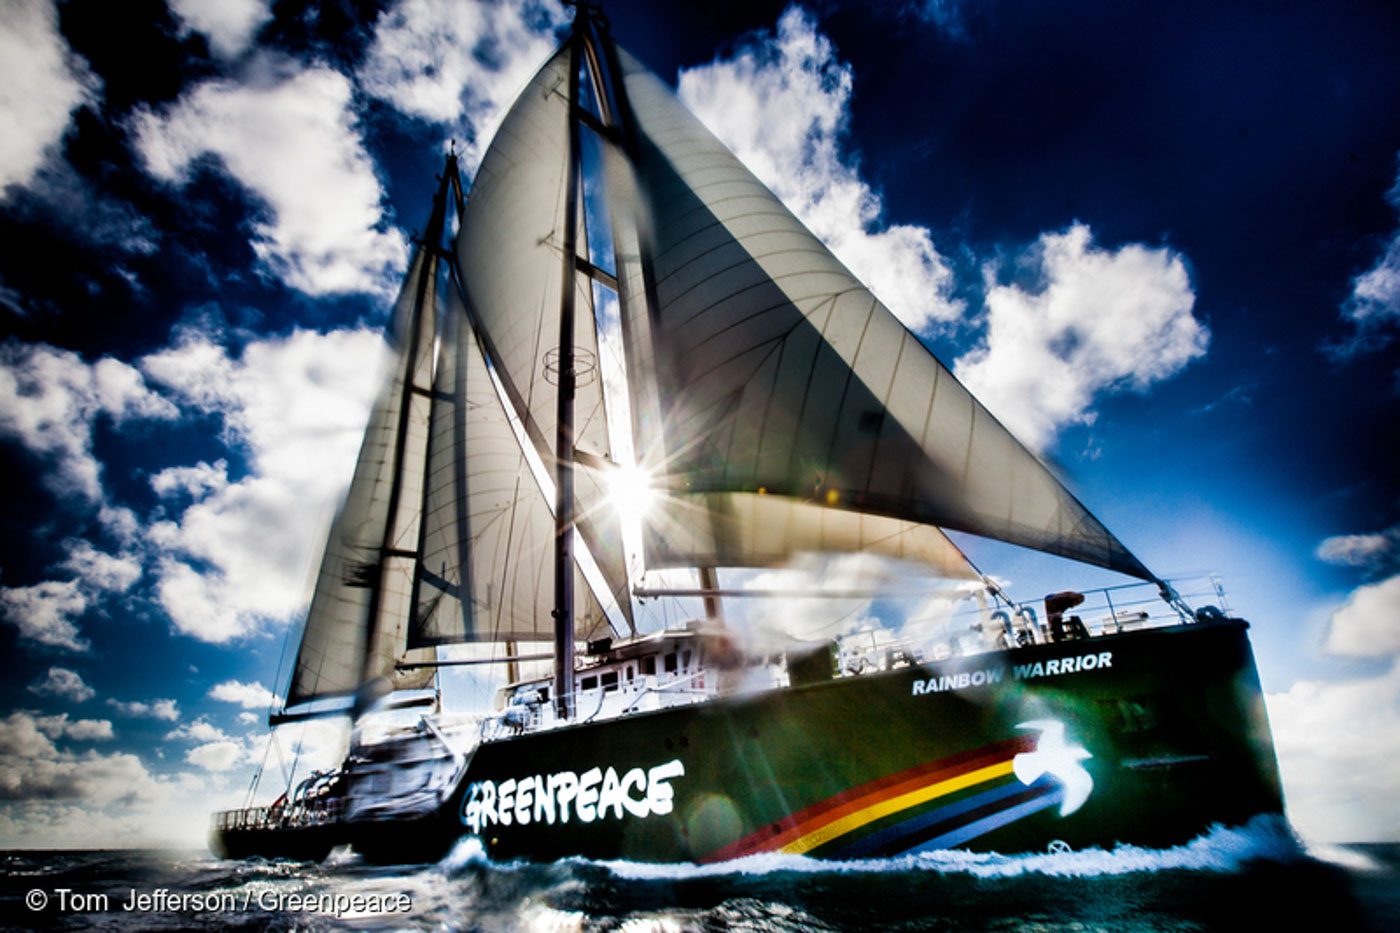 RAINBOW WARRIOR. The Rainbow Warrior is under full sail off the Queensland coast during the 'Save the Reef' tour. File photo by Tom Jefferson / Greenpeace 